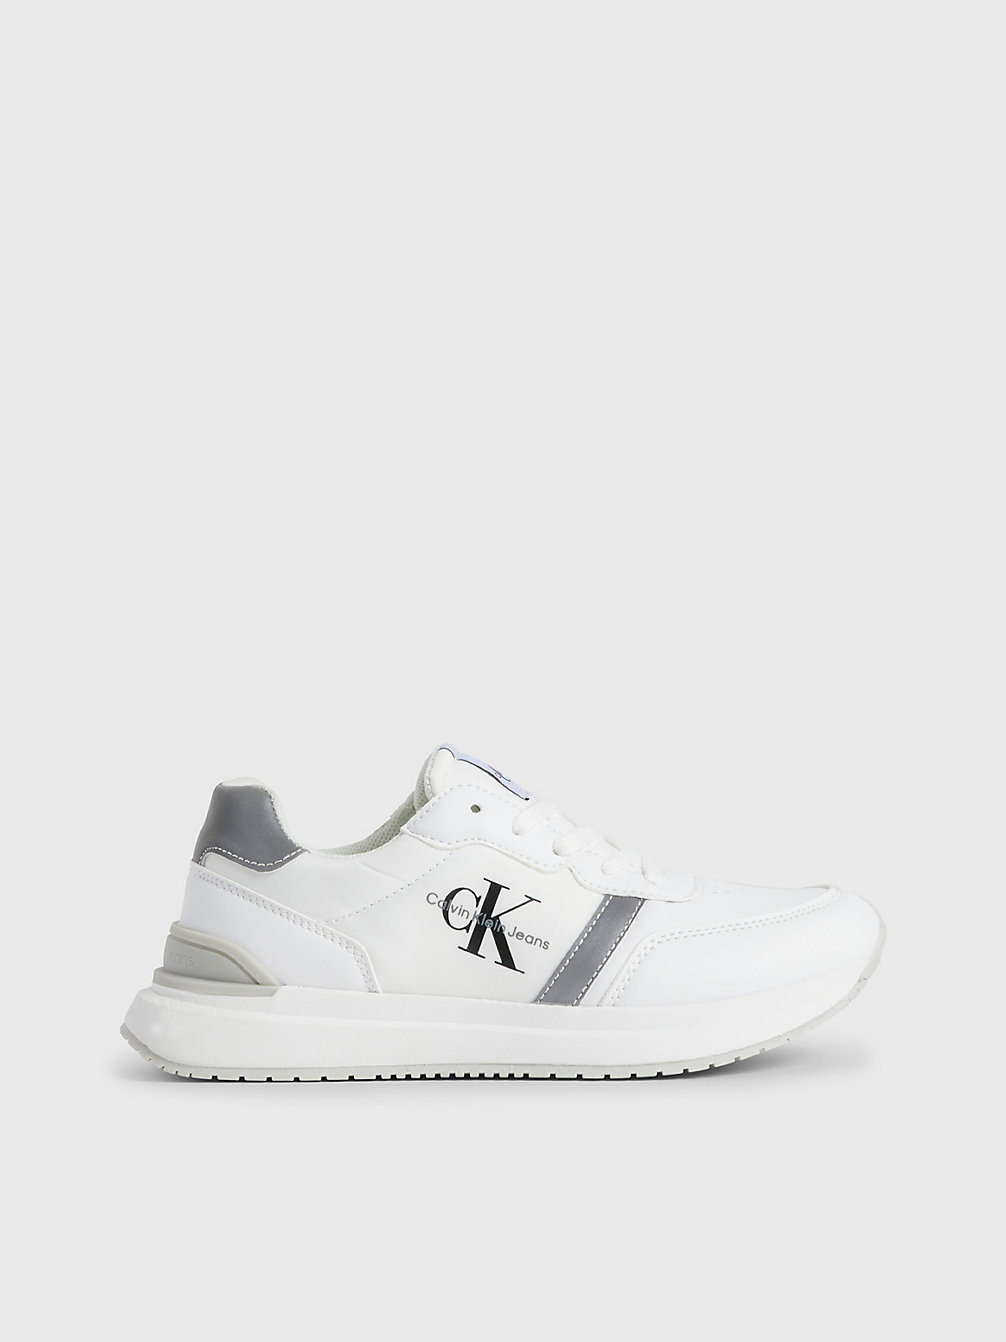 WHITE/GREY Kids Recycled Trainers undefined kids unisex Calvin Klein